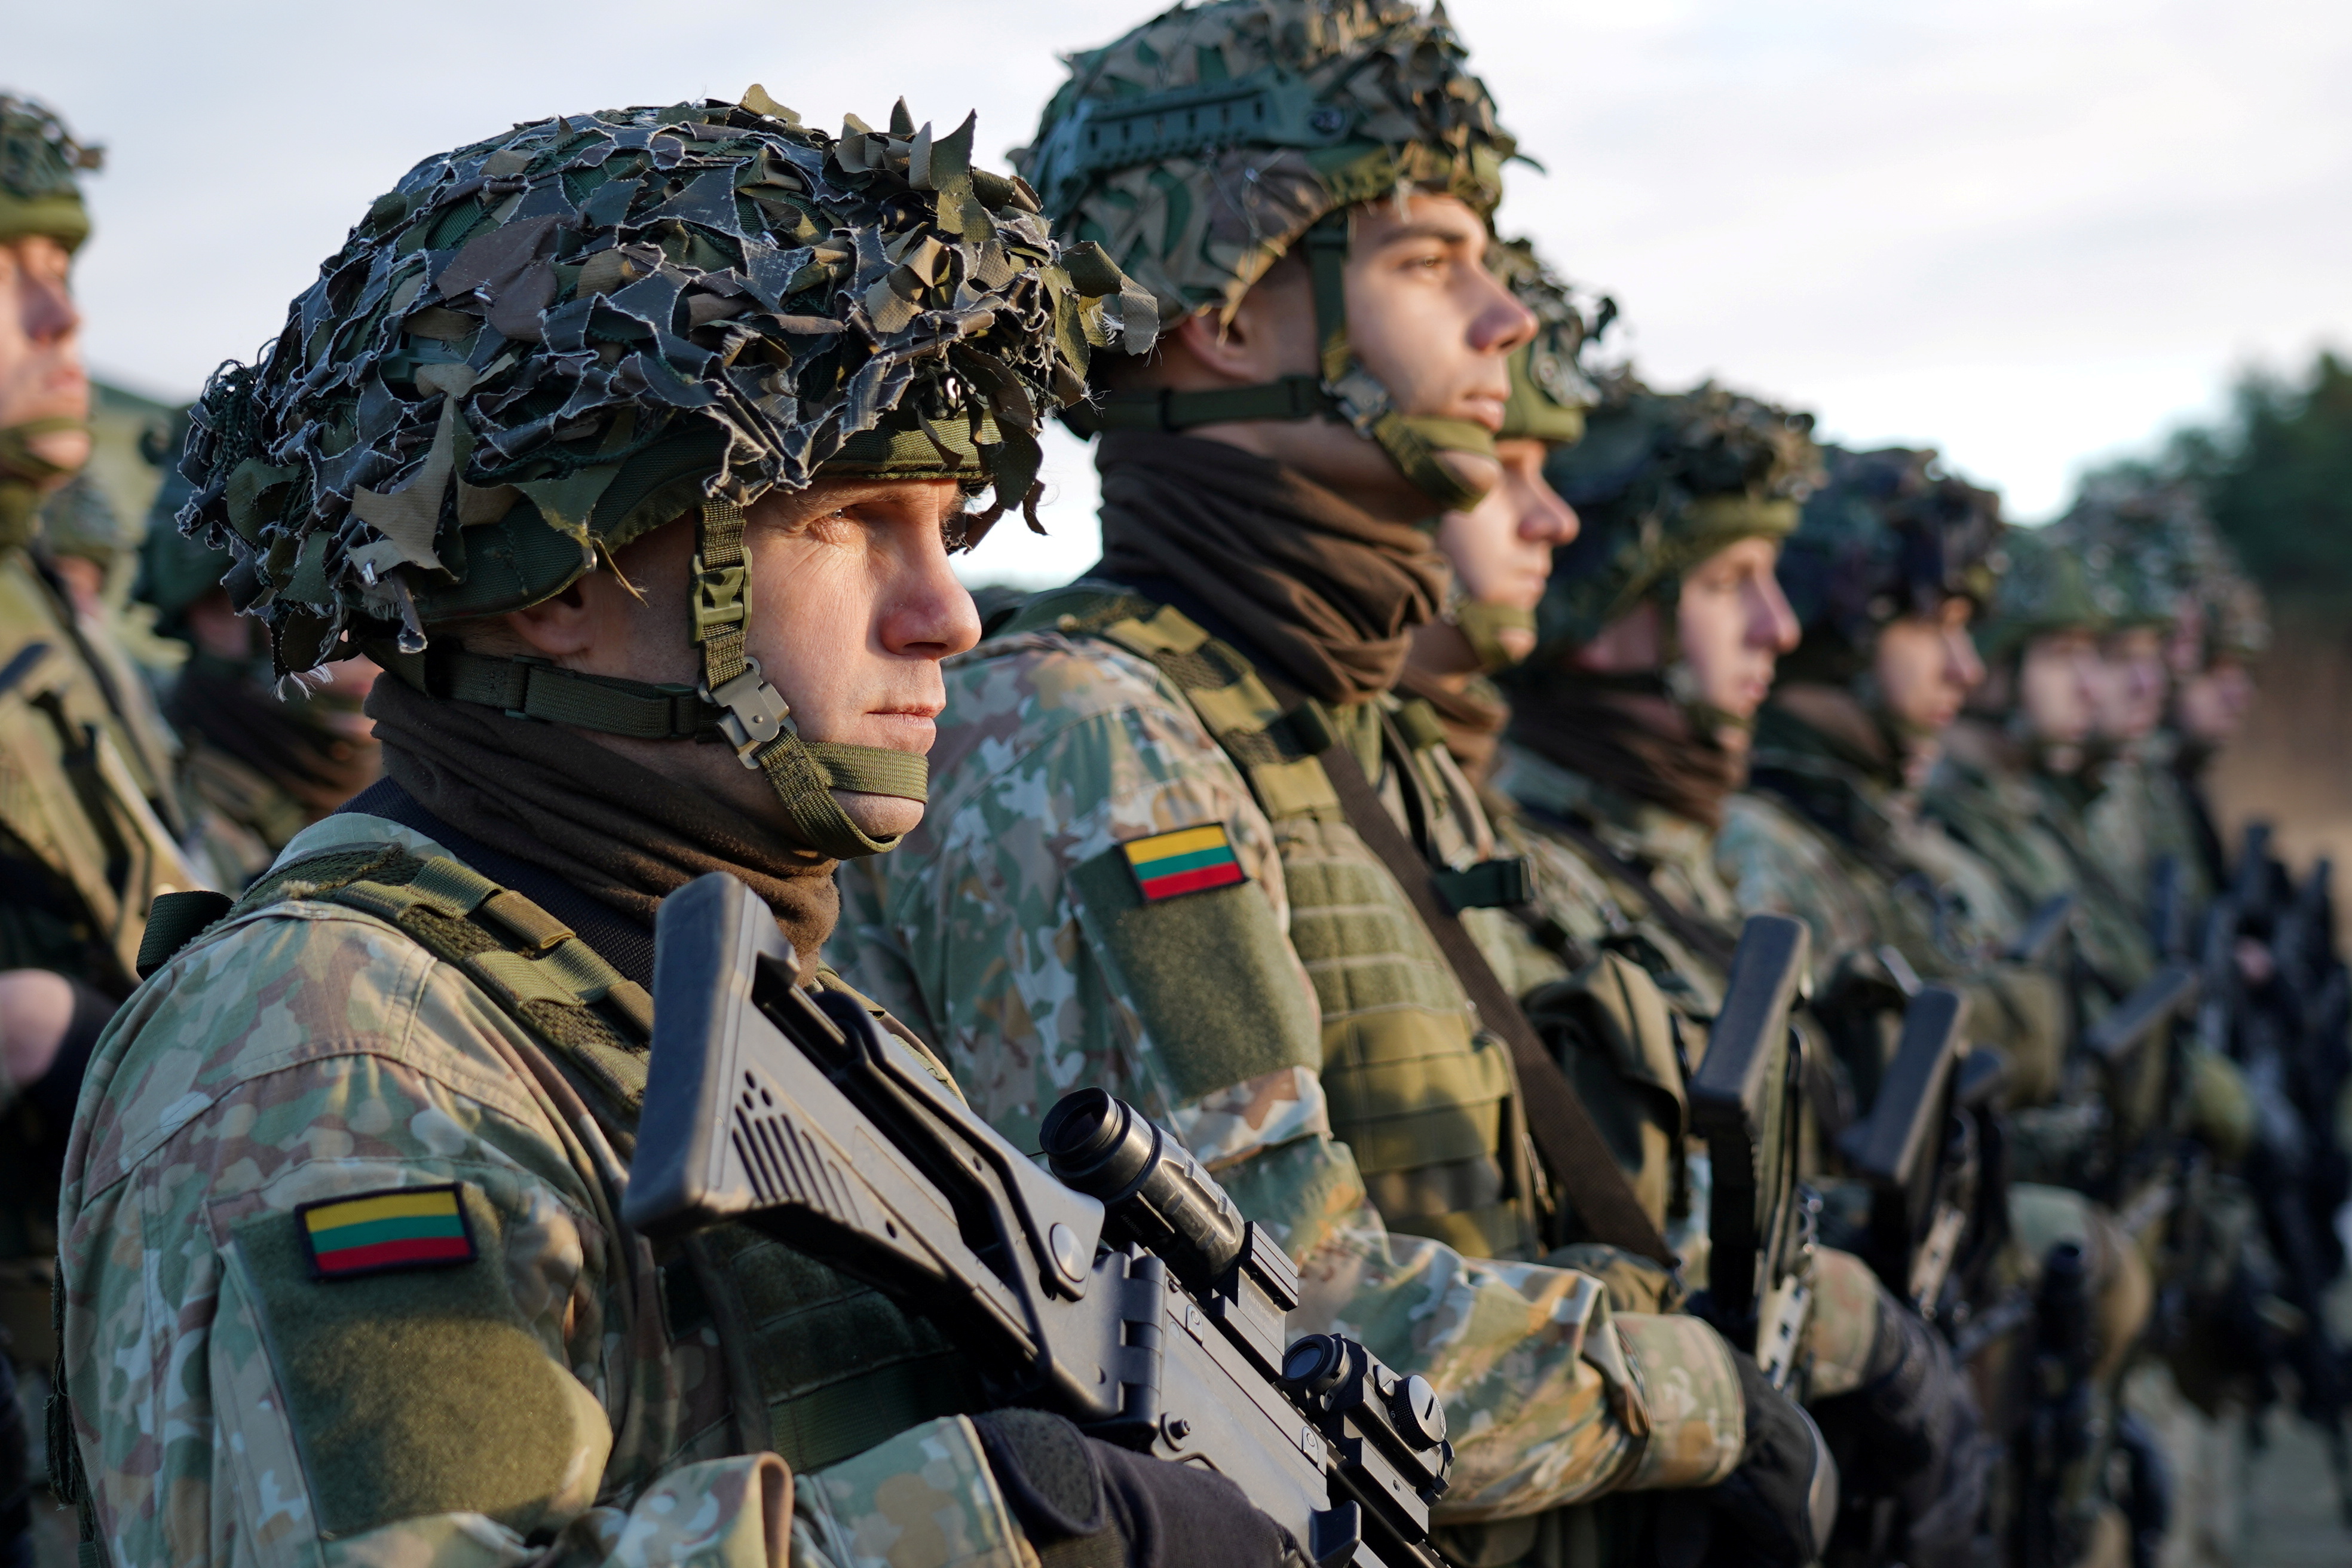 Servicemen of the Lithuanian Armed Forces look on during Lithuanian President Gitanas Nauseda's visit in Druskininkai, Lithuania November 22, 2021. REUTERS/Janis Laizans/File Photo